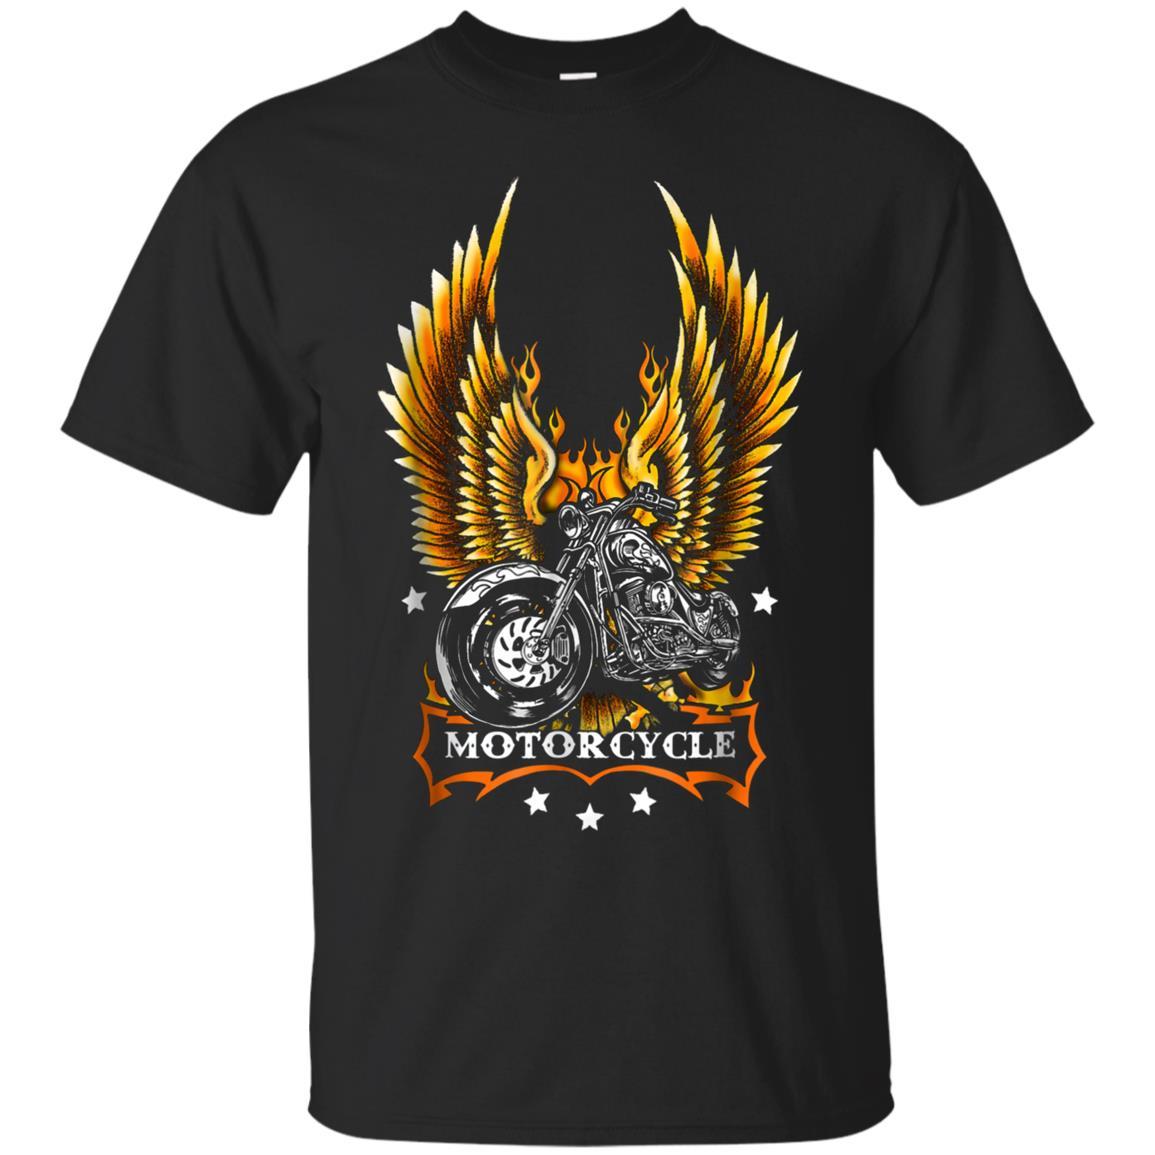 Check Out This Awesome Eagle Motorcycle Short Sleeves T-shirt